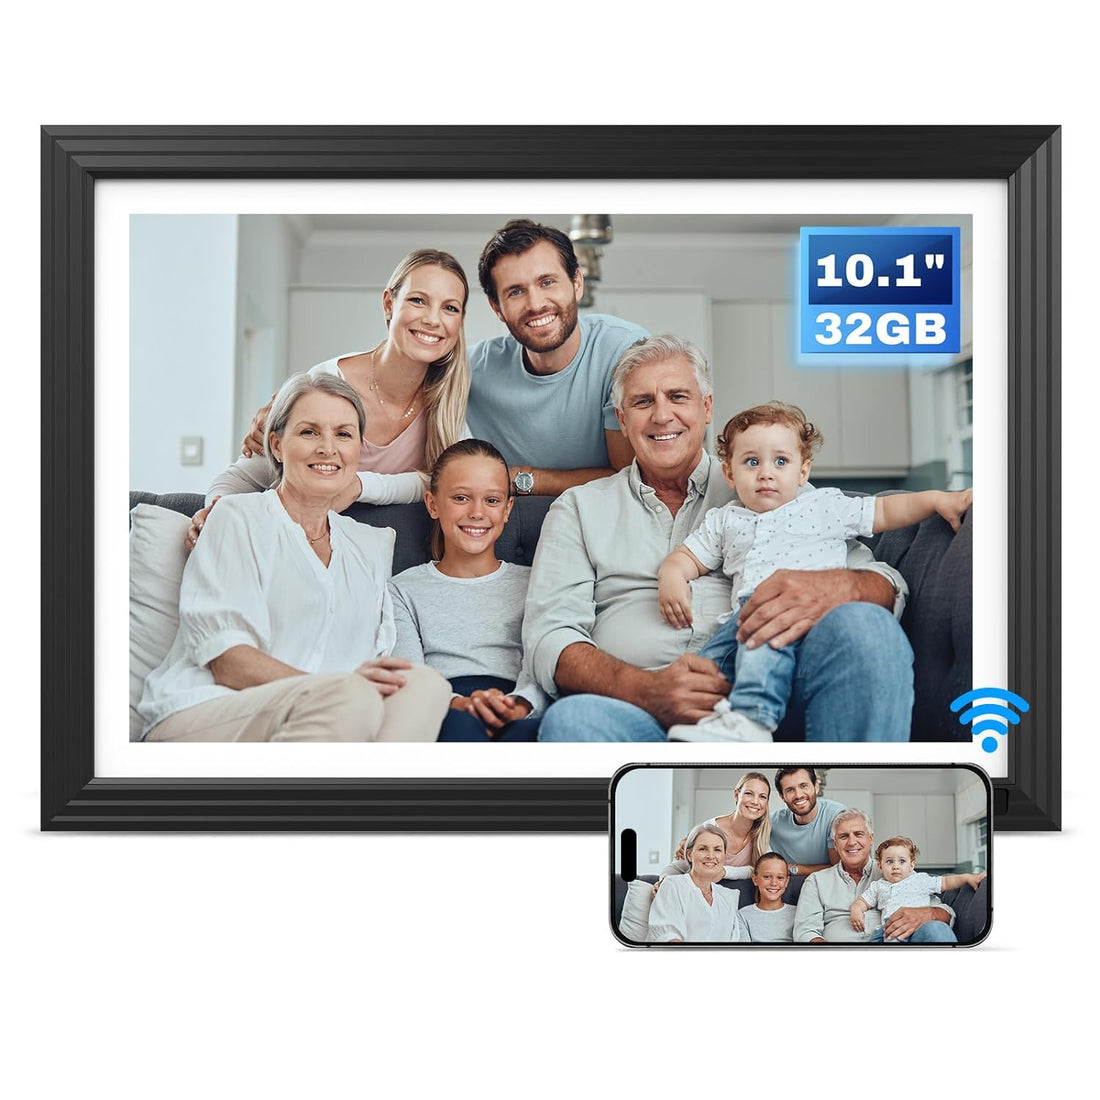 10.1 inch Digital Picture Frame, IPS Touch Screen Smart Electronic Photo Frame WiFi with 16GB Storage, Electric Video Photo Frame Slideshow with App, Auto-Rotate, Wall Mountable,Gift for Grandparents